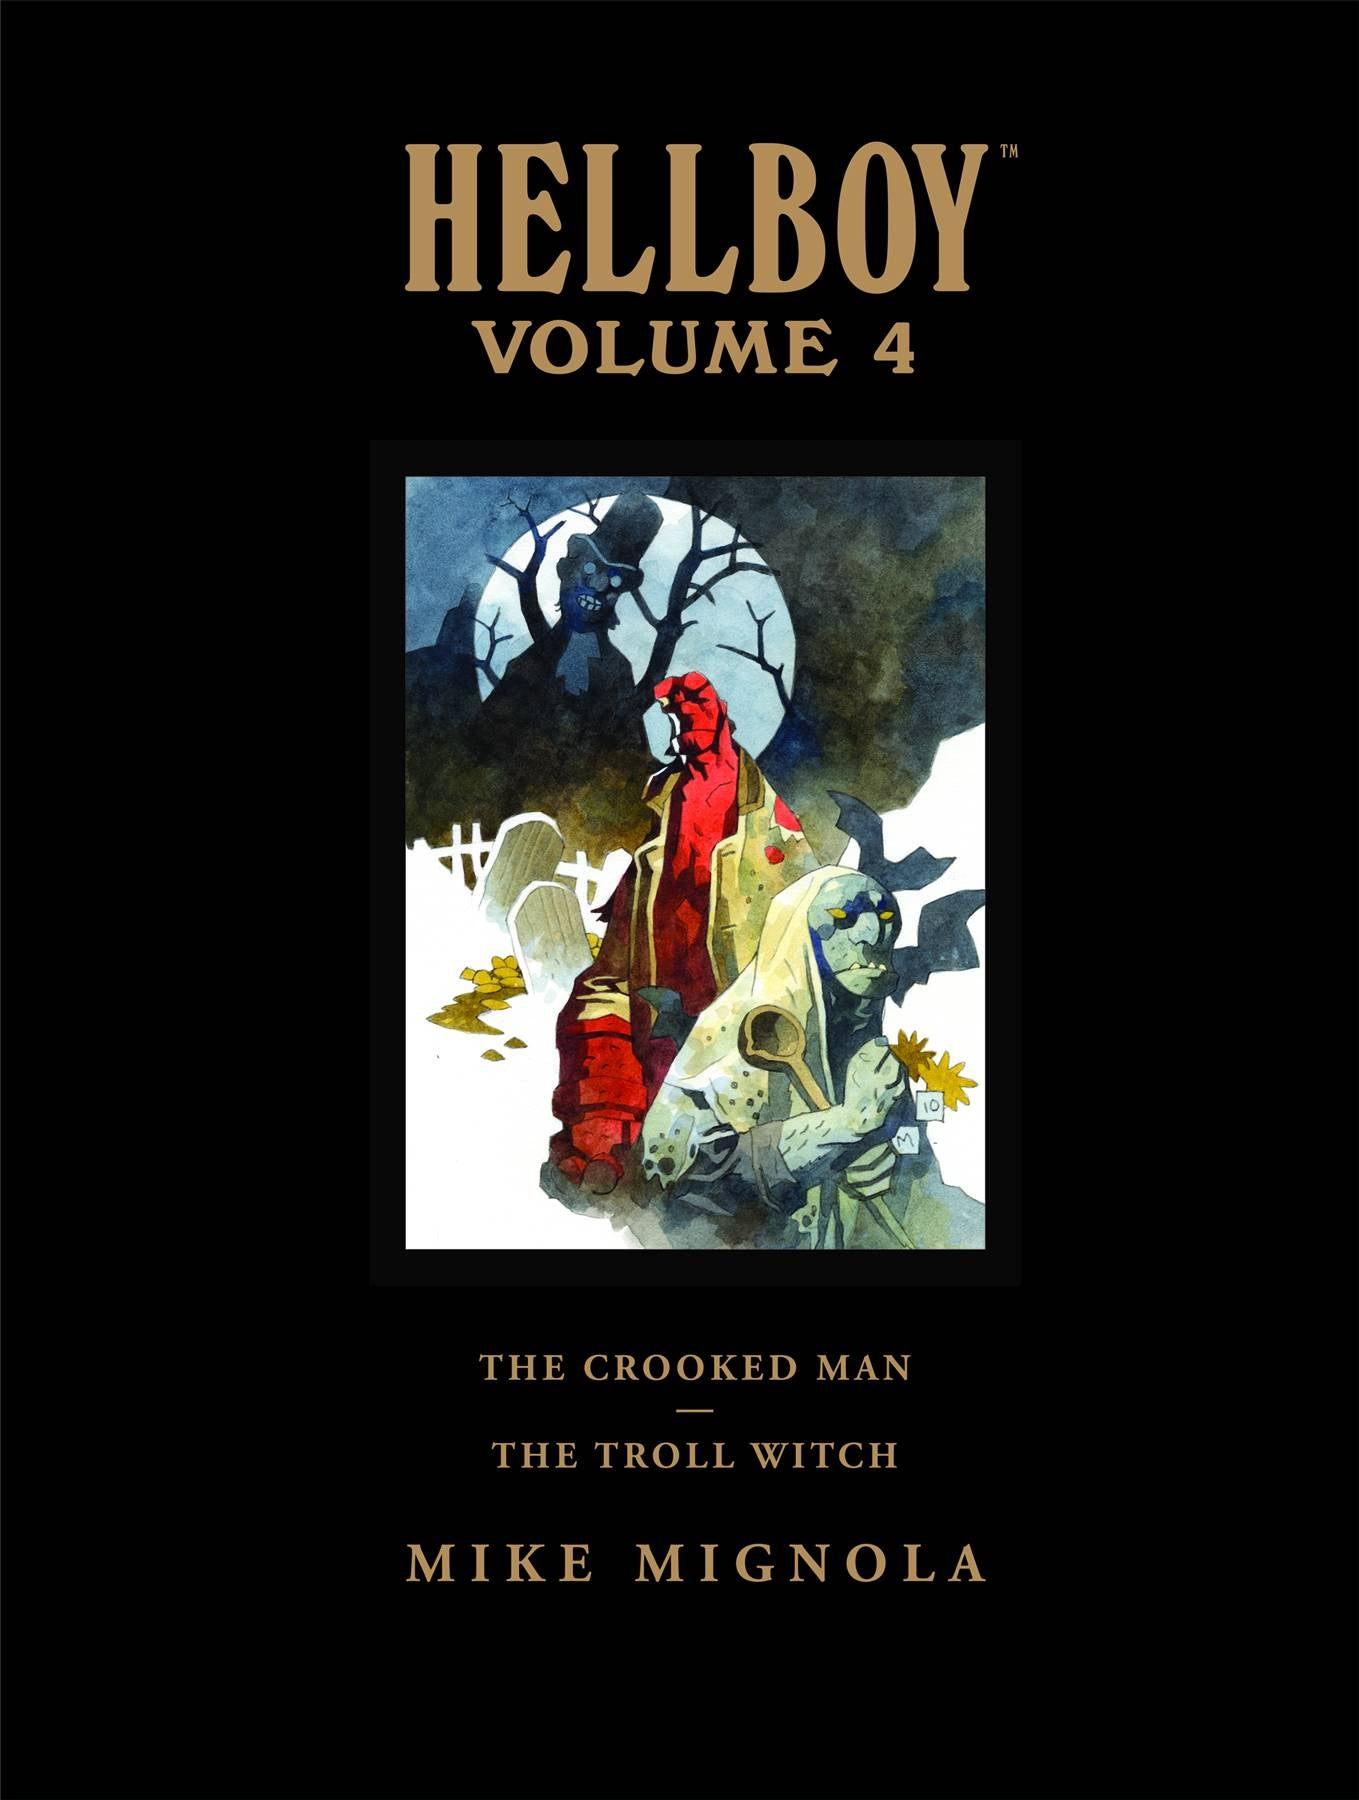 HELLBOY LIBRARY EDITION VOLUME 4 THE CROOKED MAN/THE TROLL WITCH